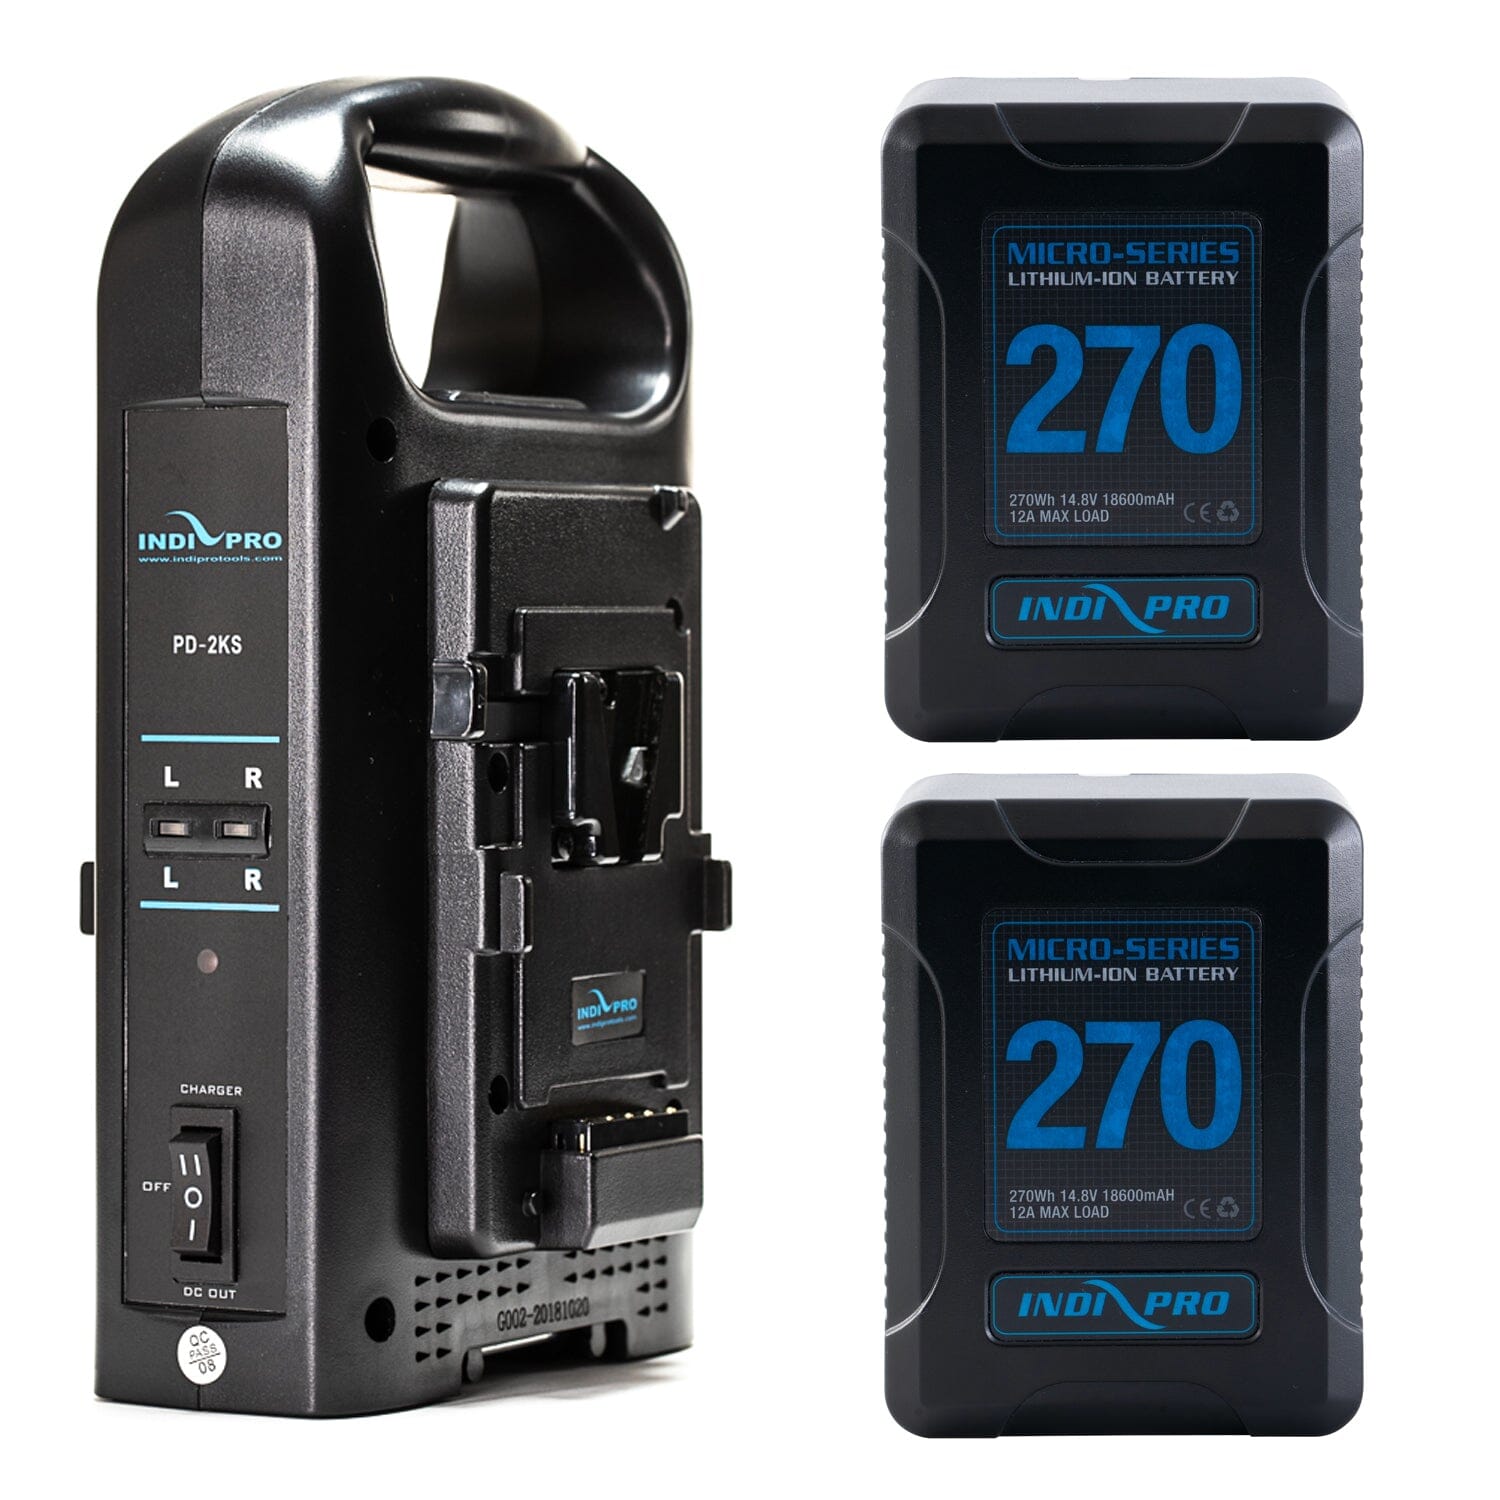 2x Micro-Series 270Wh V-Mount Li-Ion Batteries and Dual V-Mount Battery Charger Kit Indipro Tools 